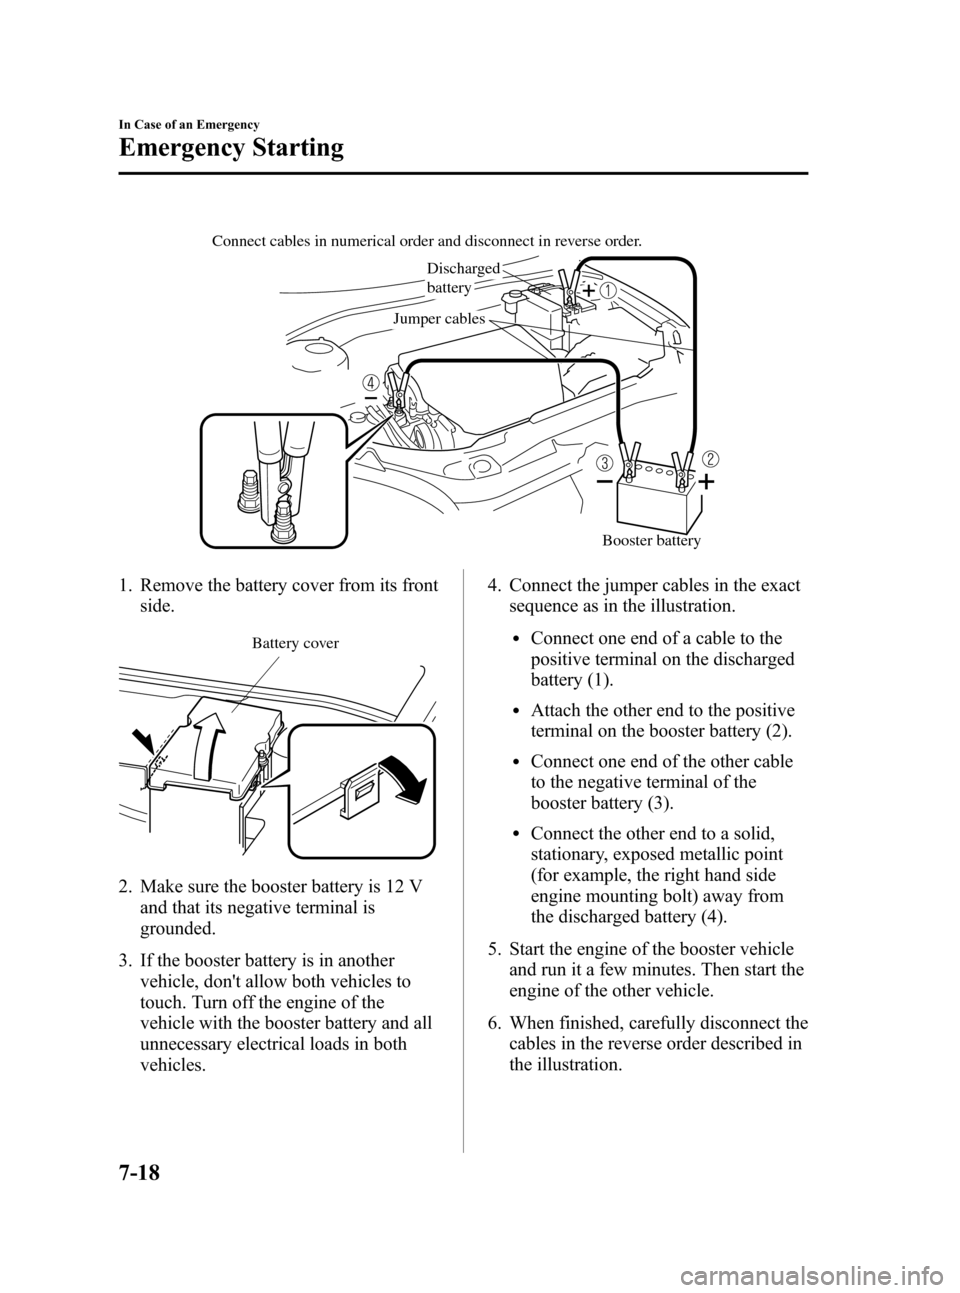 MAZDA MODEL 3 HATCHBACK 2007  Owners Manual (in English) Black plate (270,1)
Discharged 
battery
Jumper cables Connect cables in numerical order and disconnect in reverse order.
Booster battery
1. Remove the battery cover from its front
side.
Battery cover
